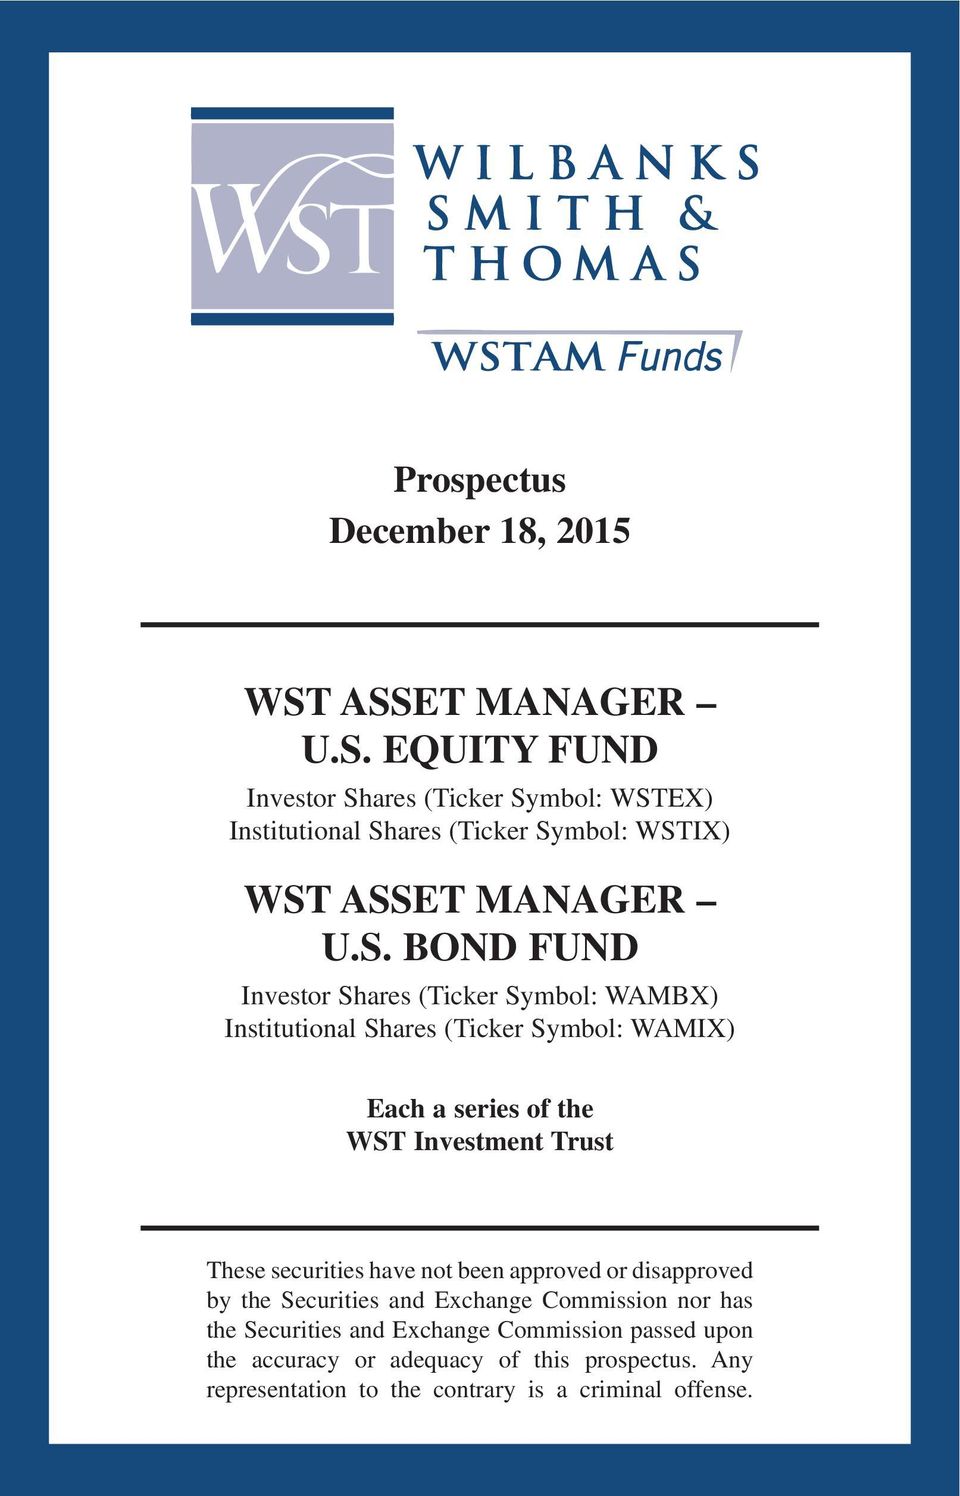 BOND FUND Investor Shares (Ticker Symbol: WAMBX) Institutional Shares (Ticker Symbol: WAMIX) Each a series of the WST Investment Trust These